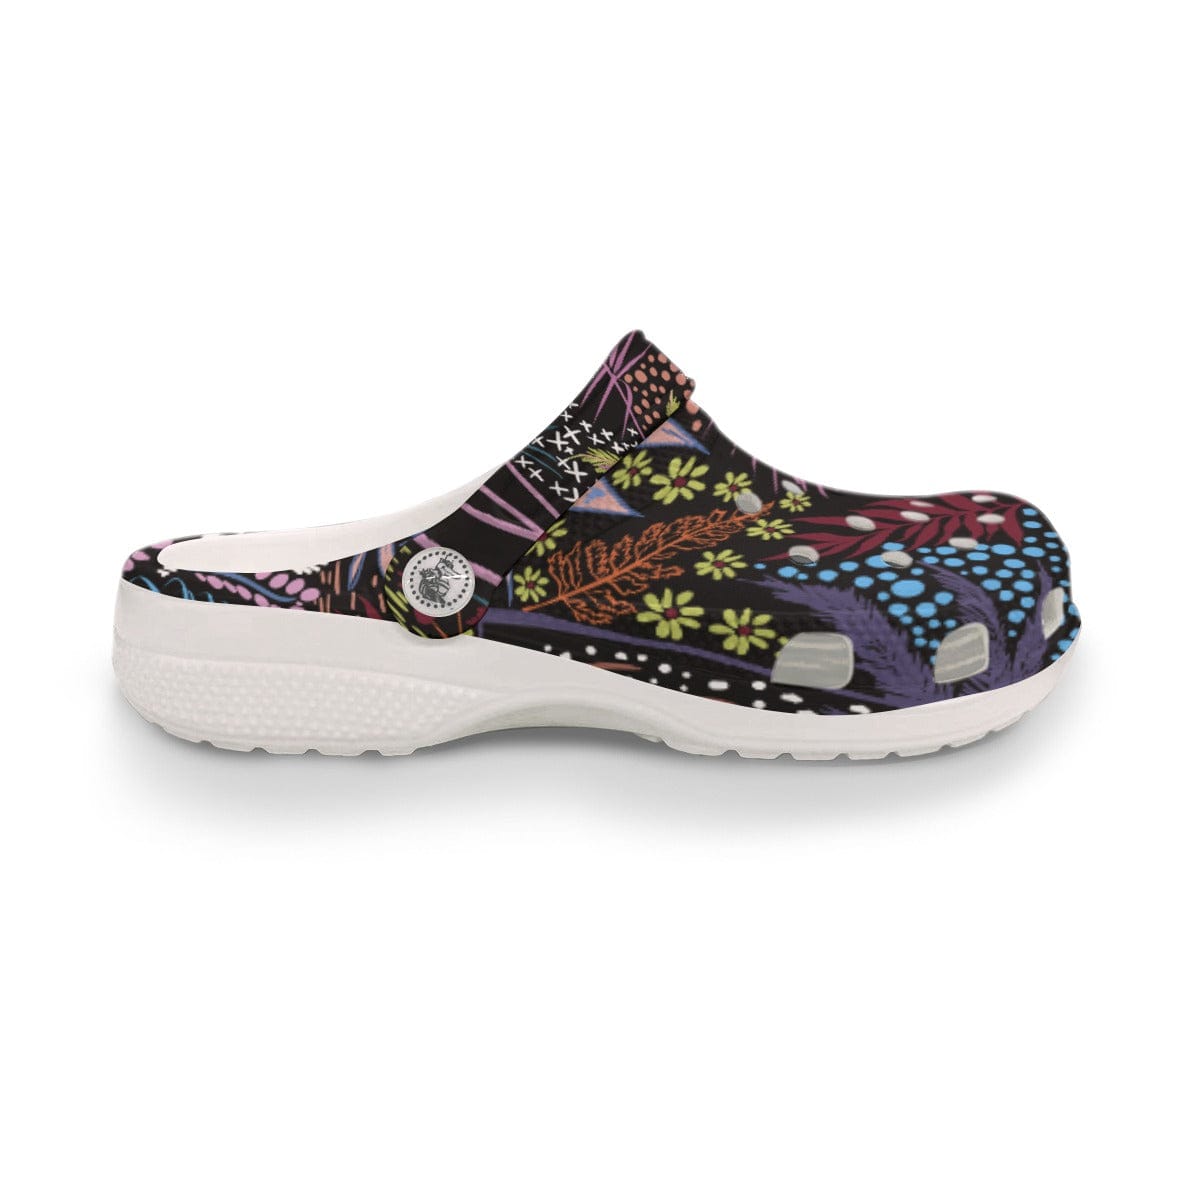 Yoycol Pedal Pops Blossom Bliss - Women's Classic Clogs Printed